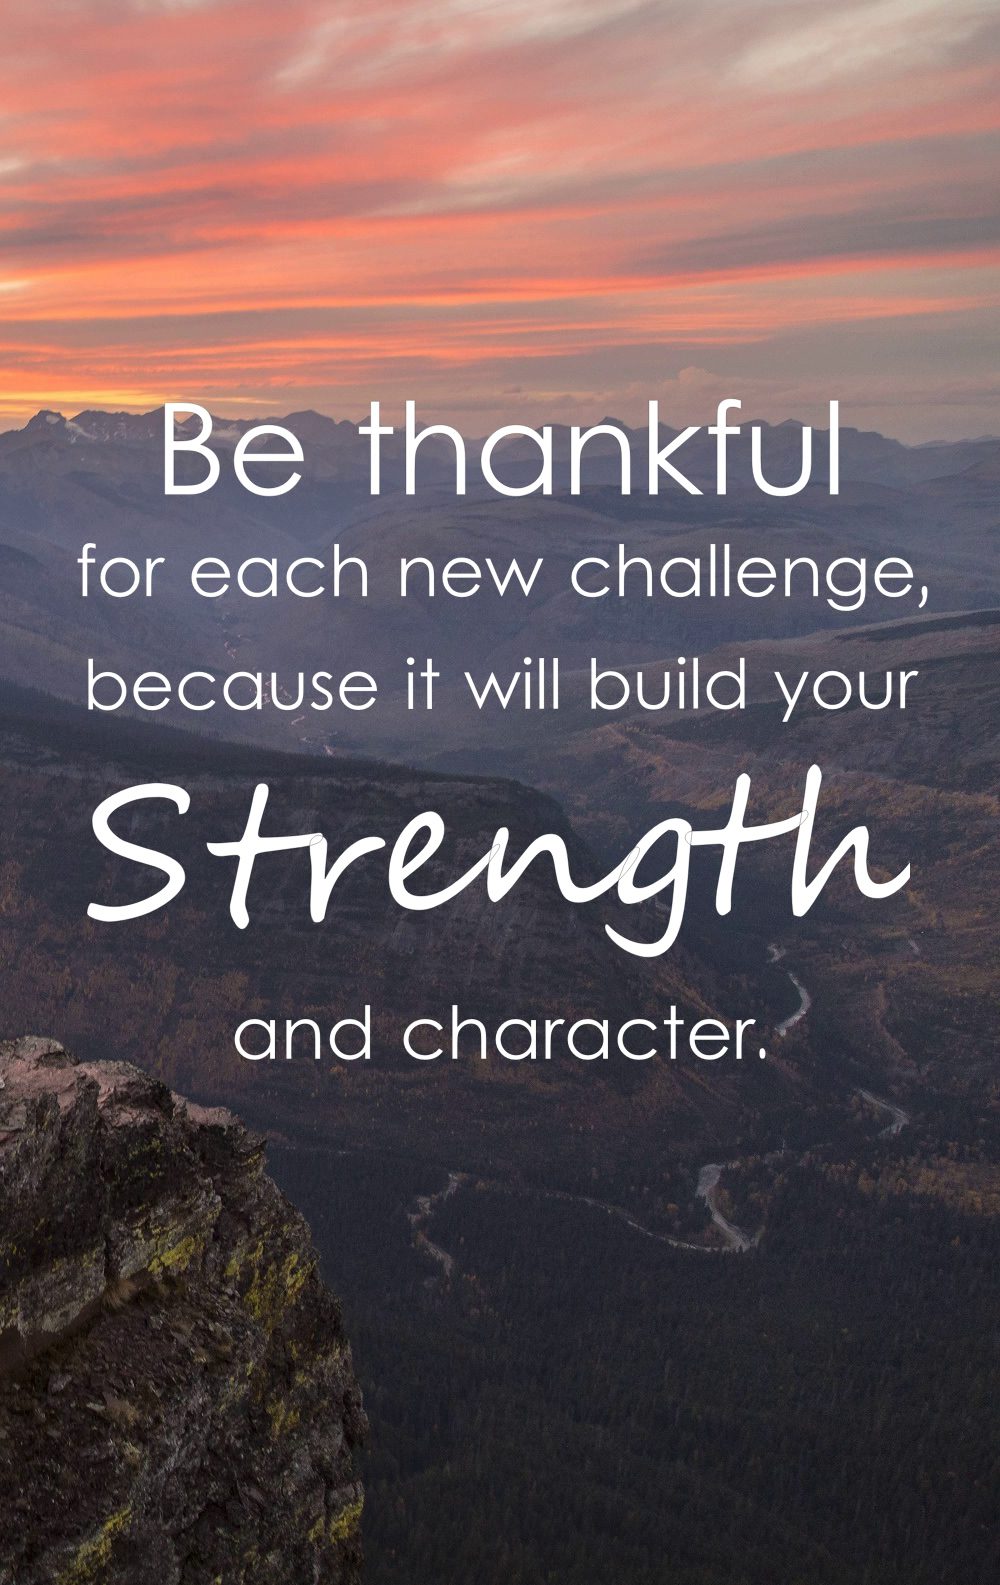 Be thankful for each new challenge because it will build your strength and character.